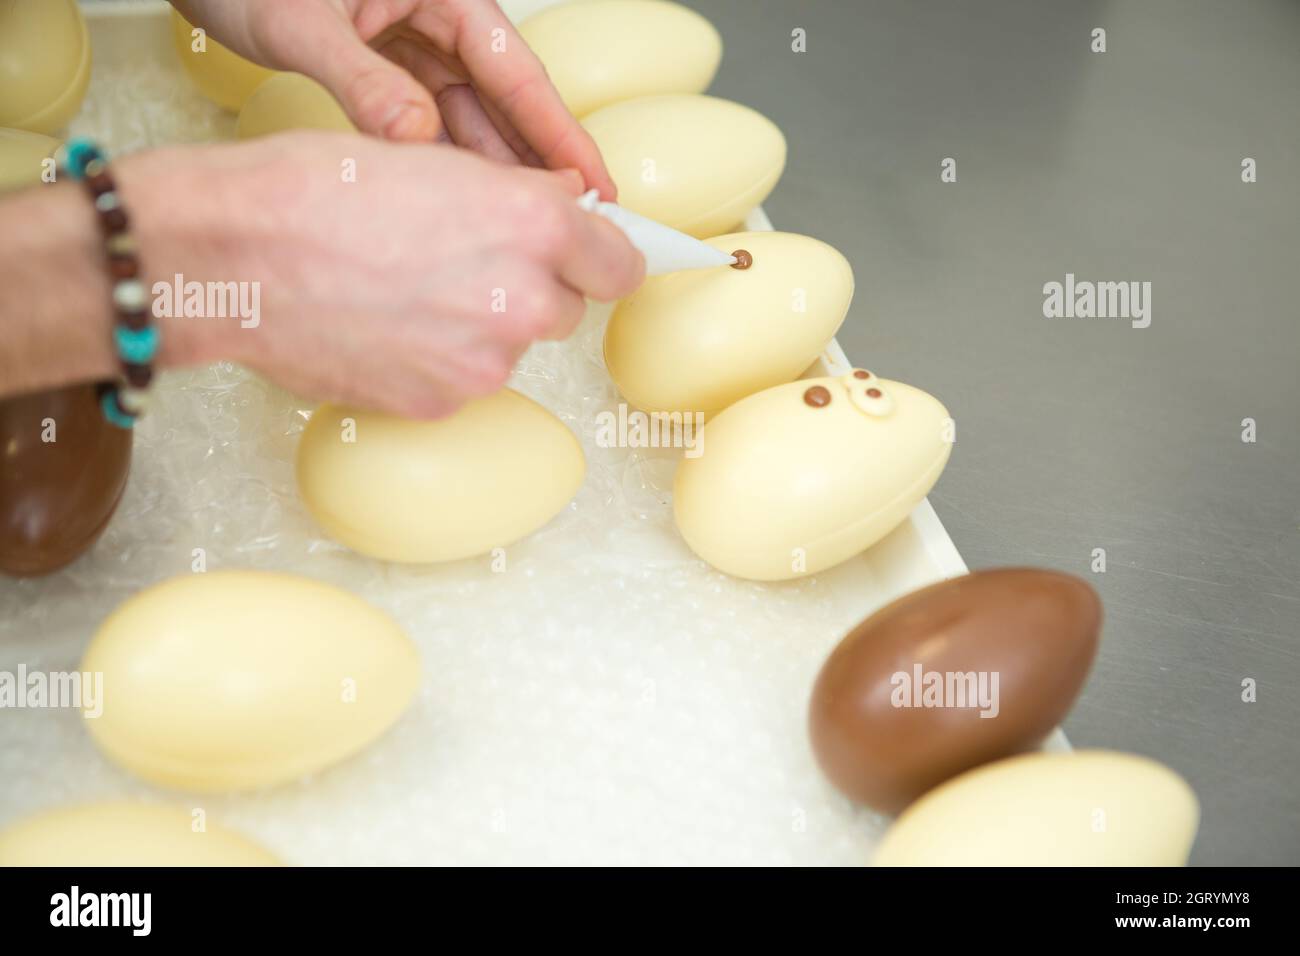 hand decorating a white chocolate egg Stock Photo